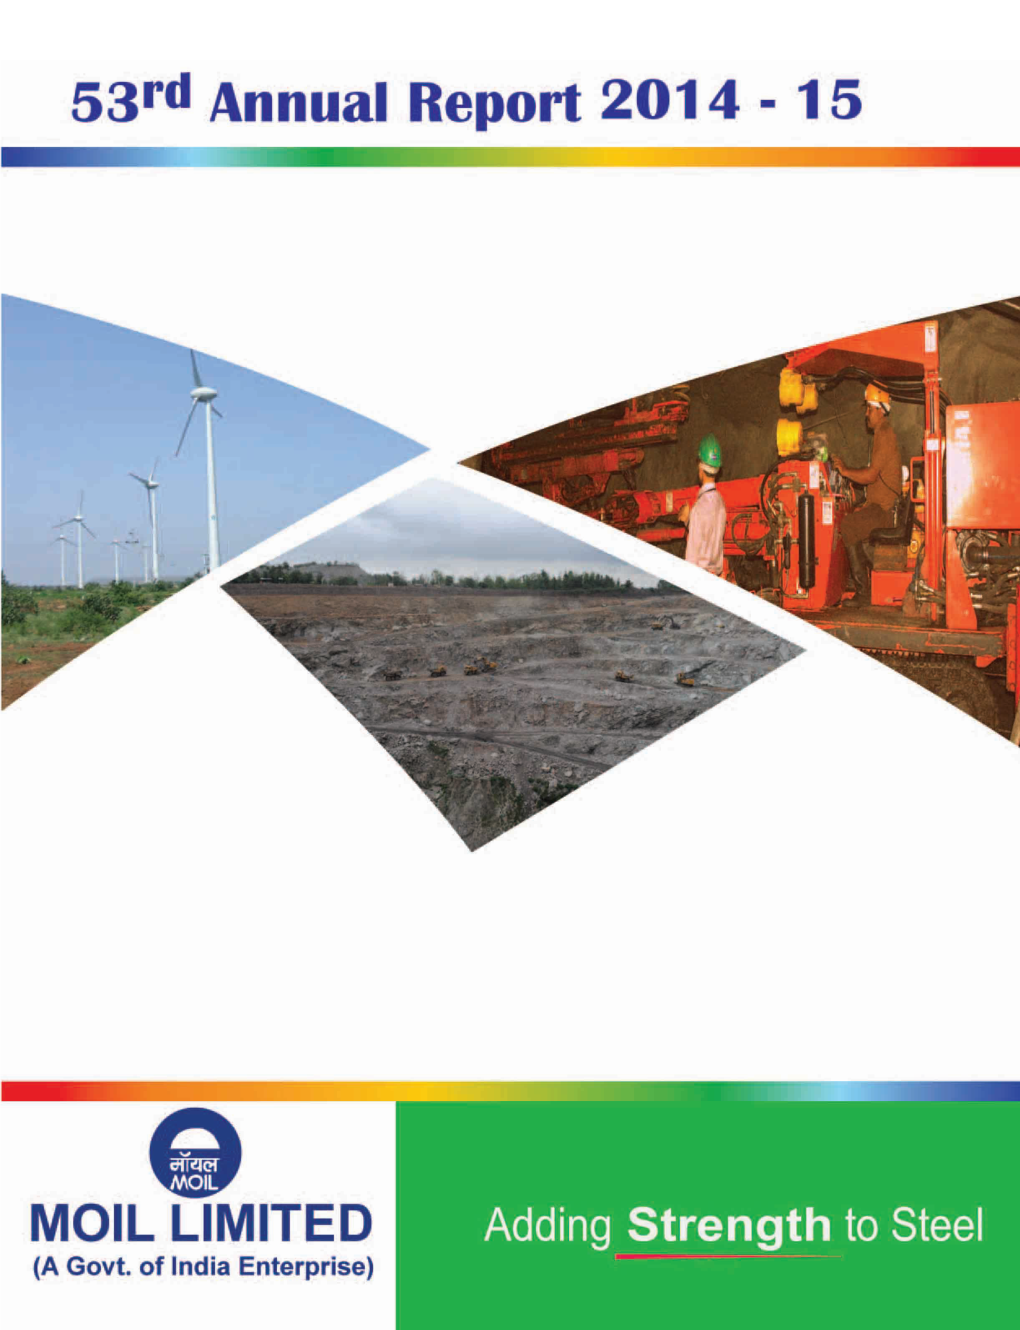 Annual Report 2014-15 1 Moil Limited